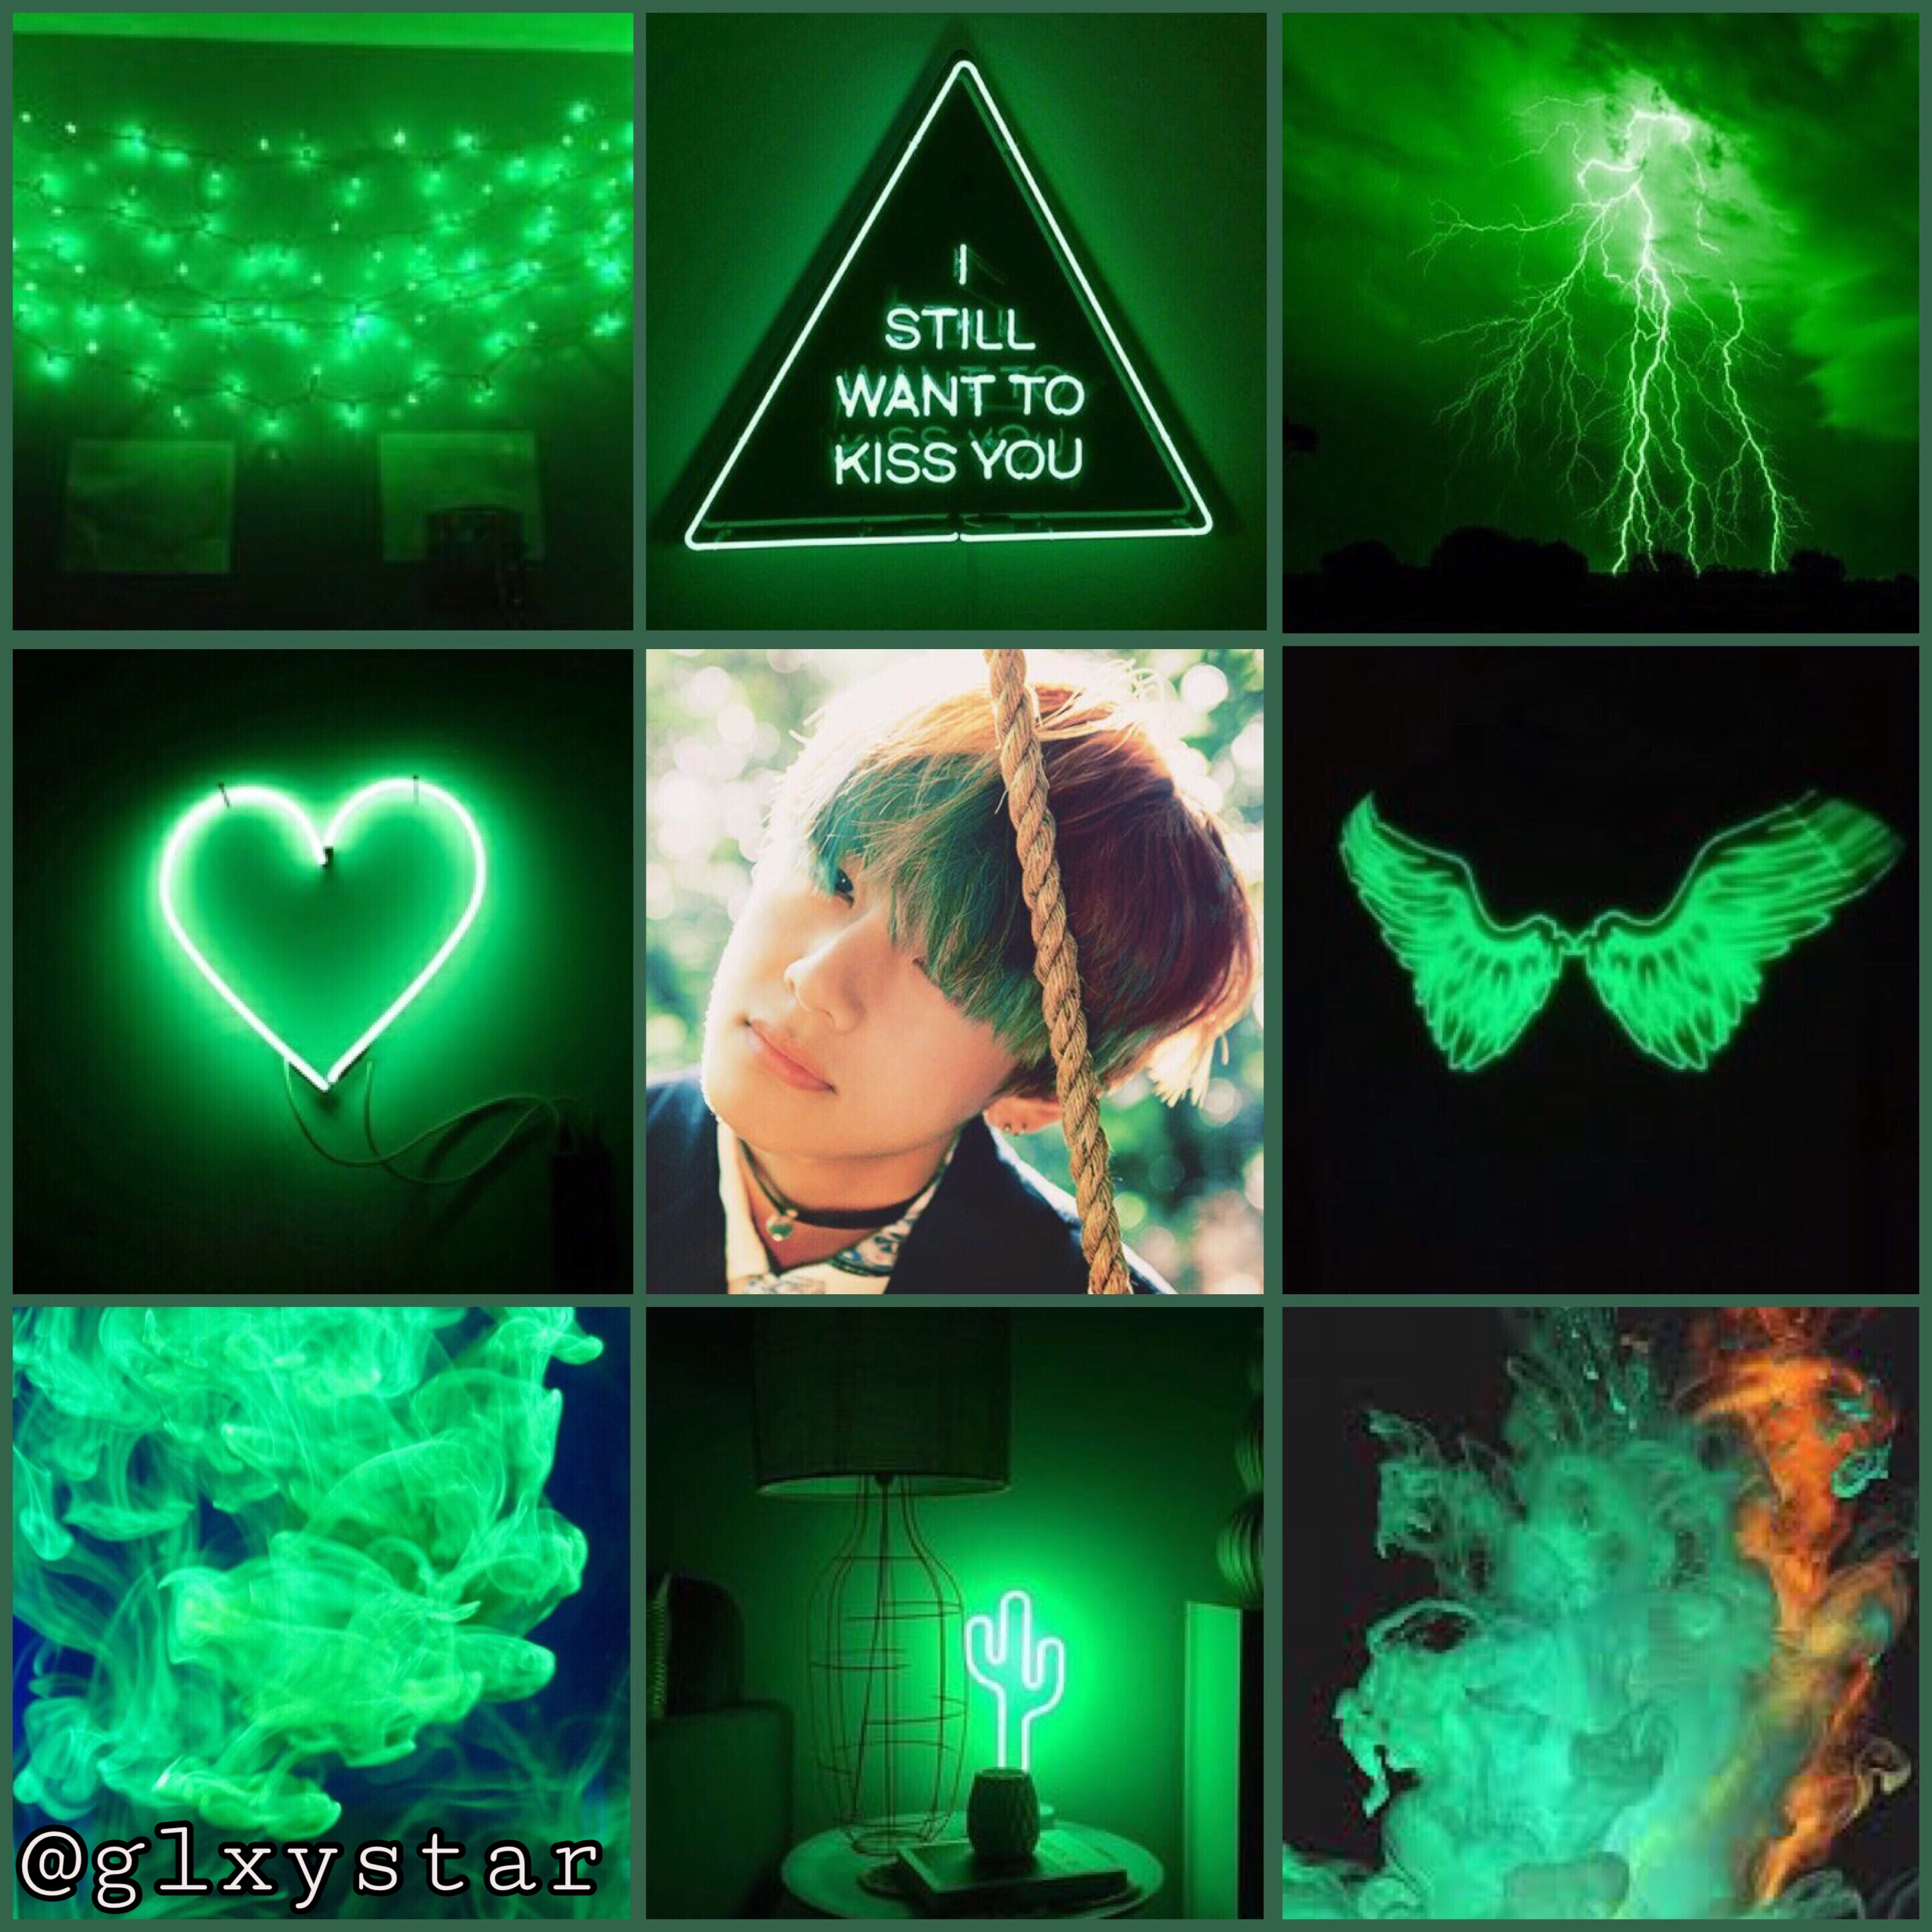 taehyung bts green aesthetic edit image by @glxystar